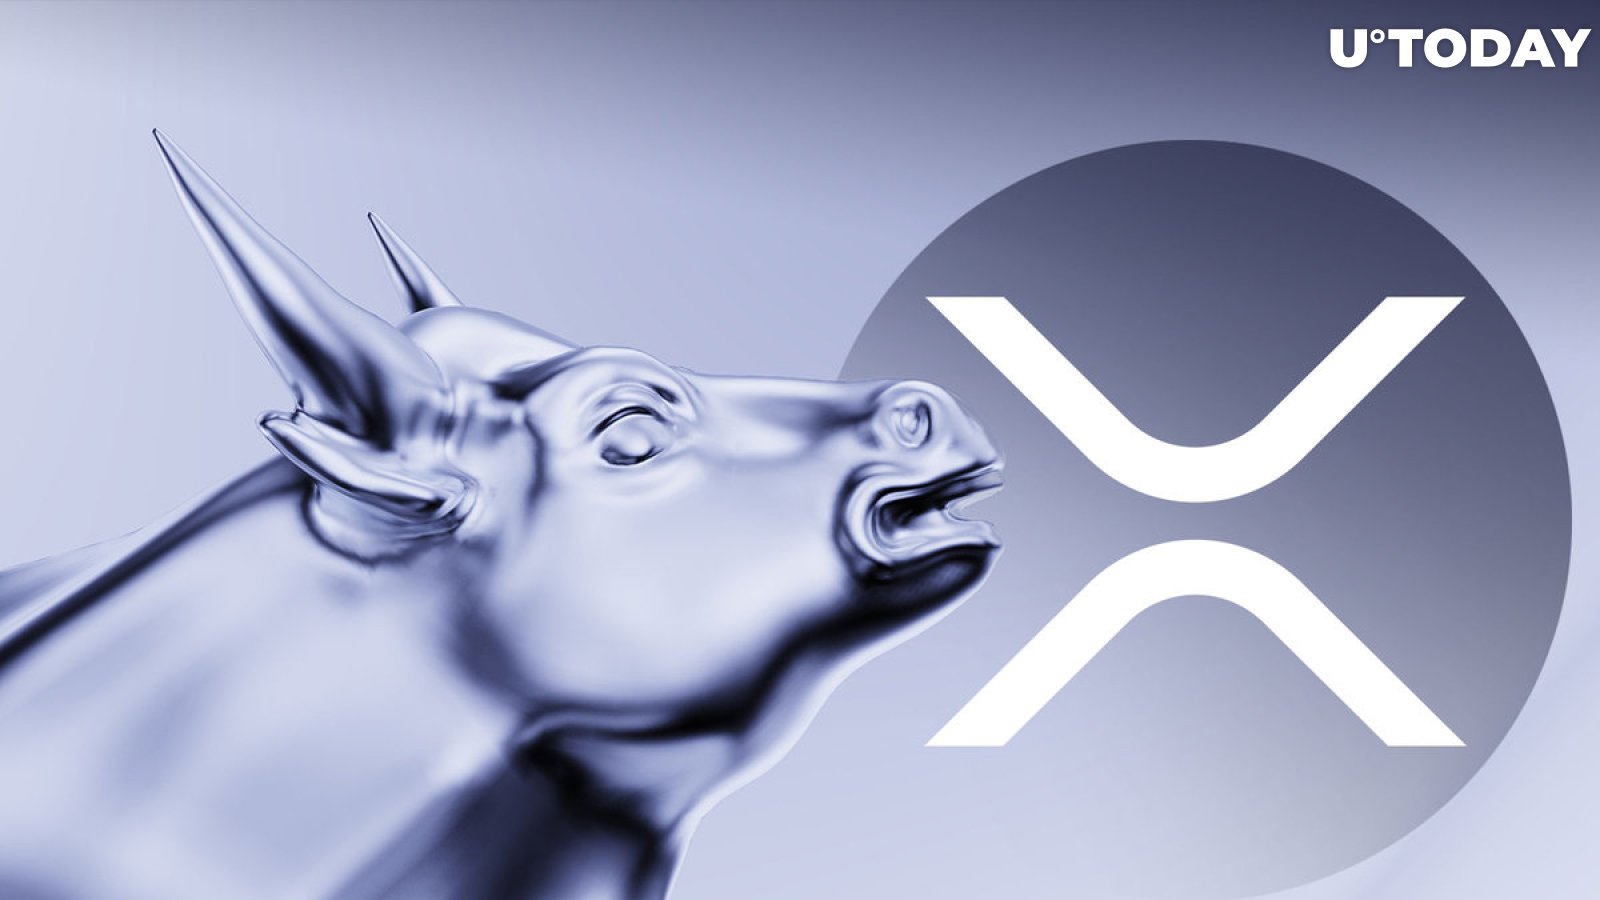 XRP Forms Major Bullish Pattern That Could Push Price to $0.69